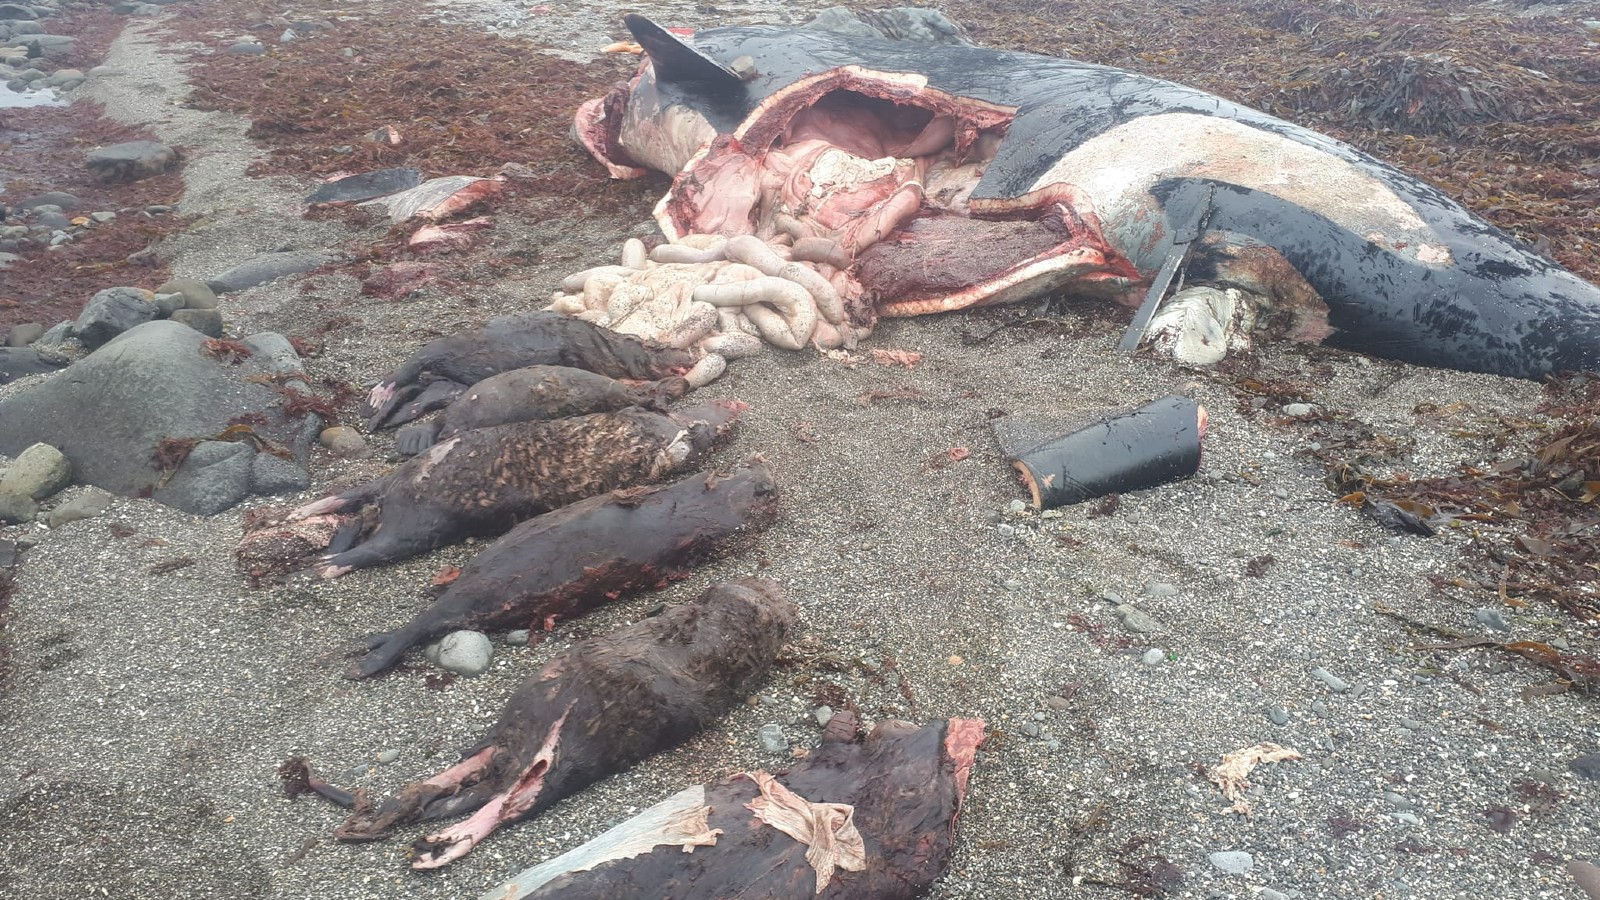 Stranded killer whale laying on the beach opposite 6 otters that were found inside its stomach